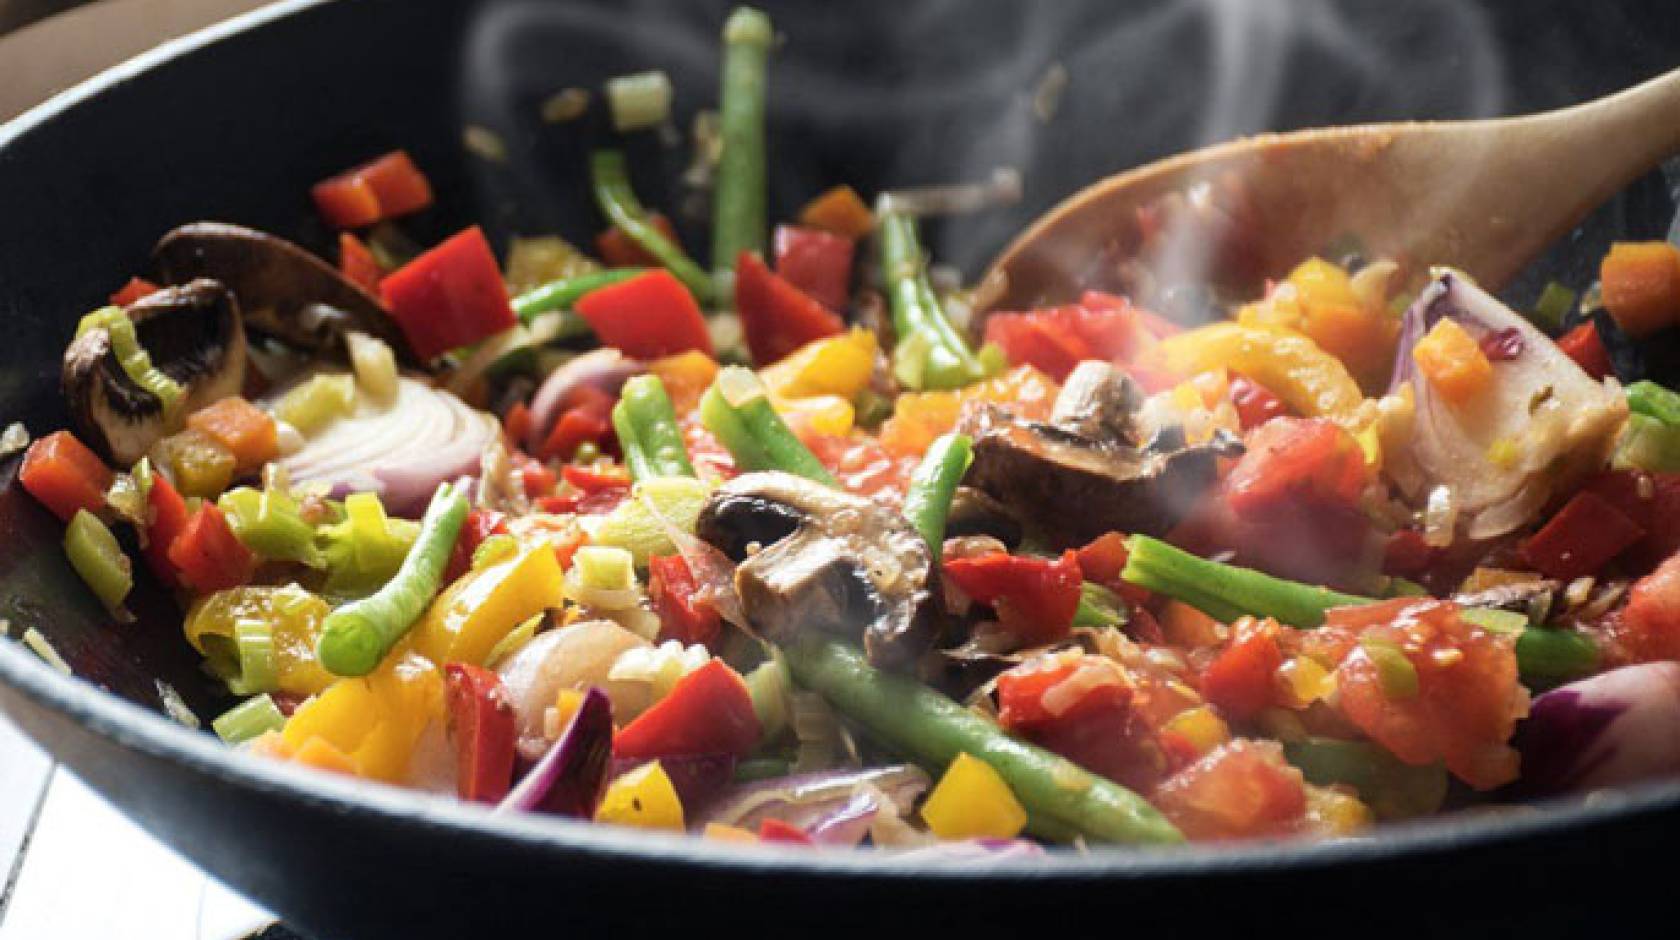 Vegetables being cooked in a pan